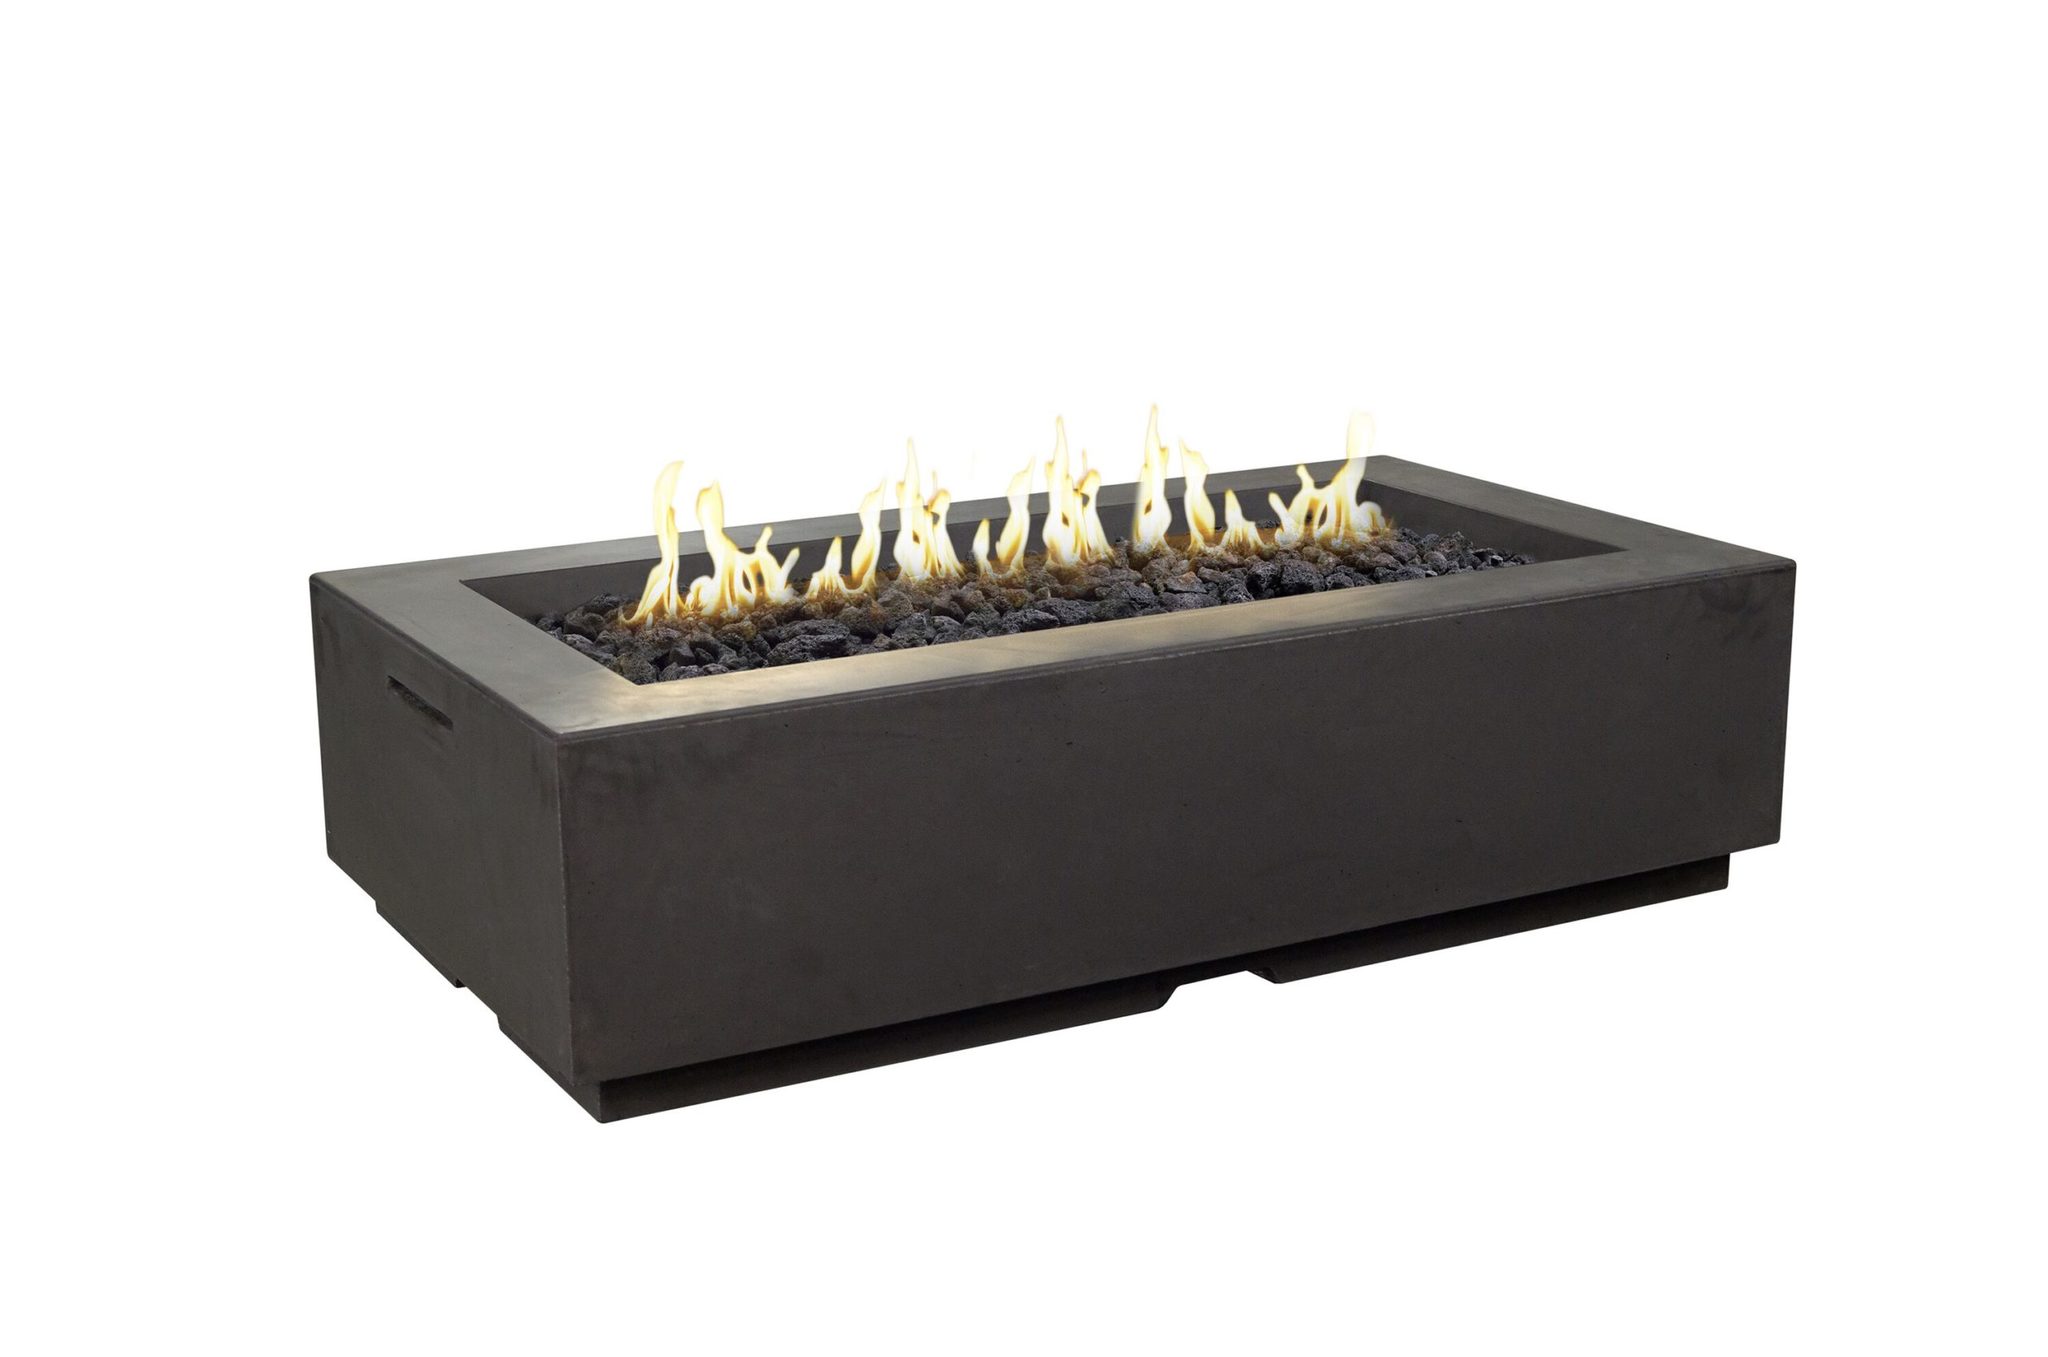 Louvre outdoor gas fire pit